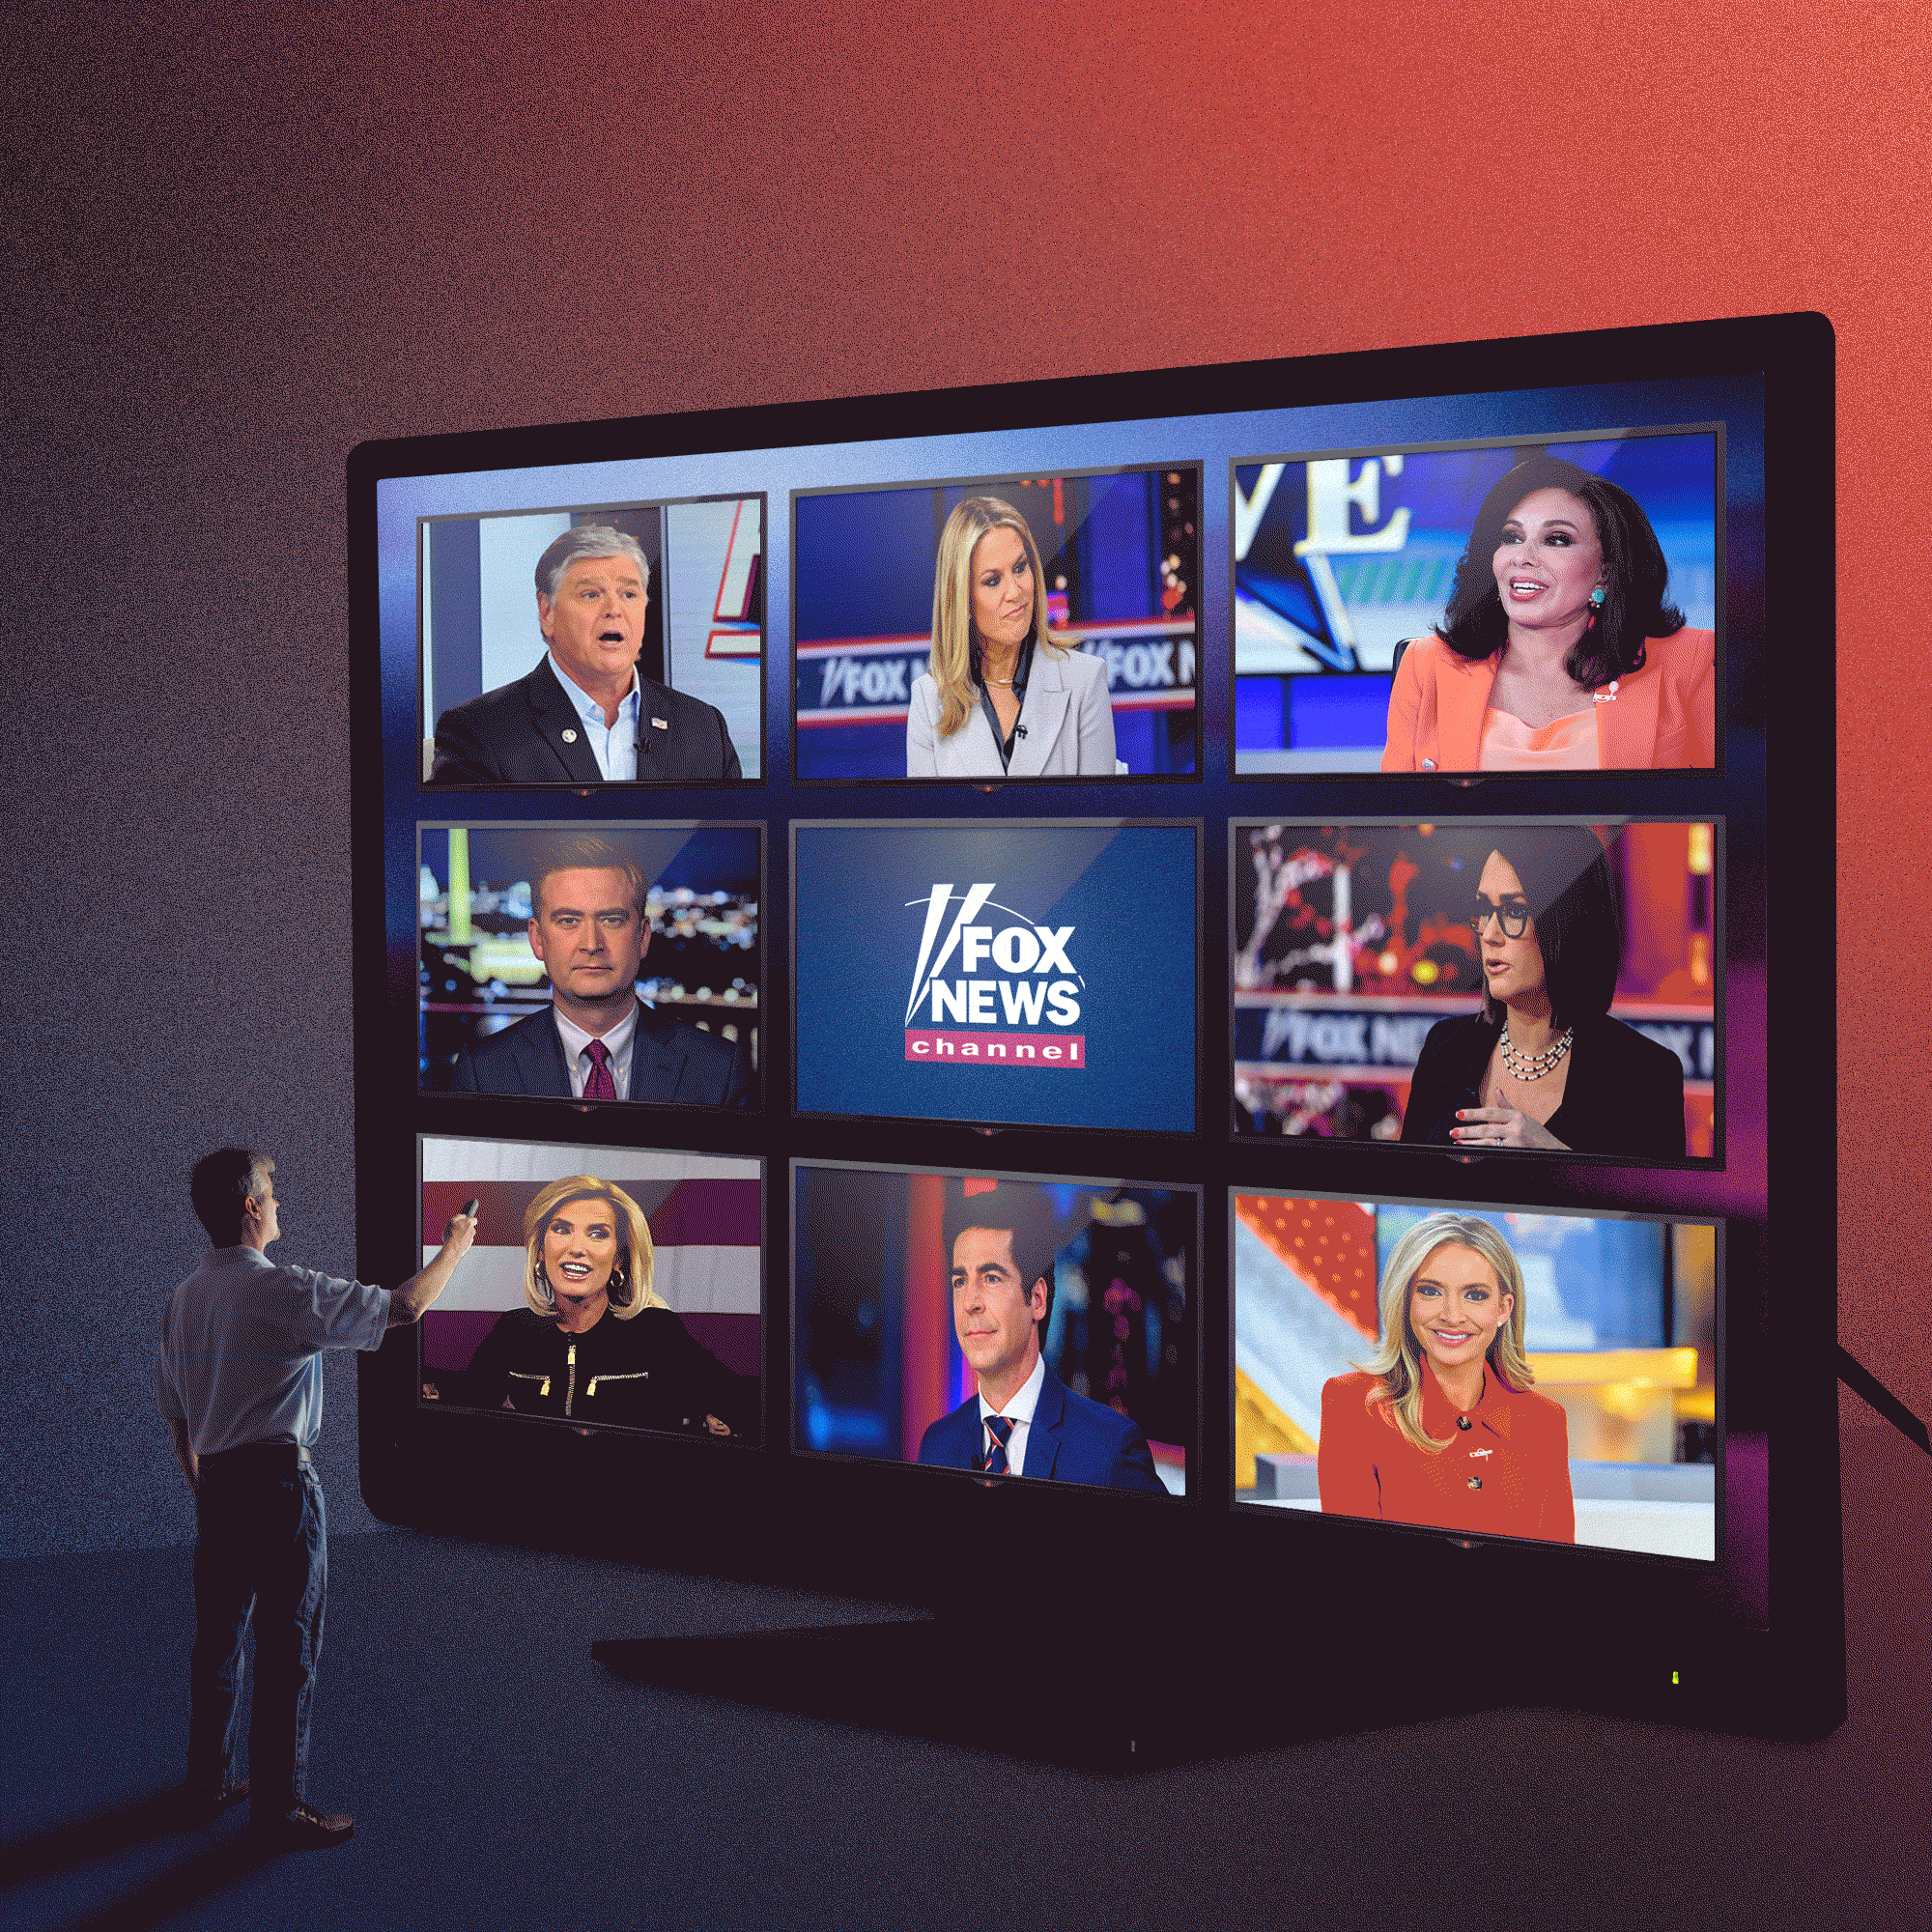 A flickering TV screen showing a smattering of Fox News personalities. A miniature person stands in front of the TV, holding a remote.